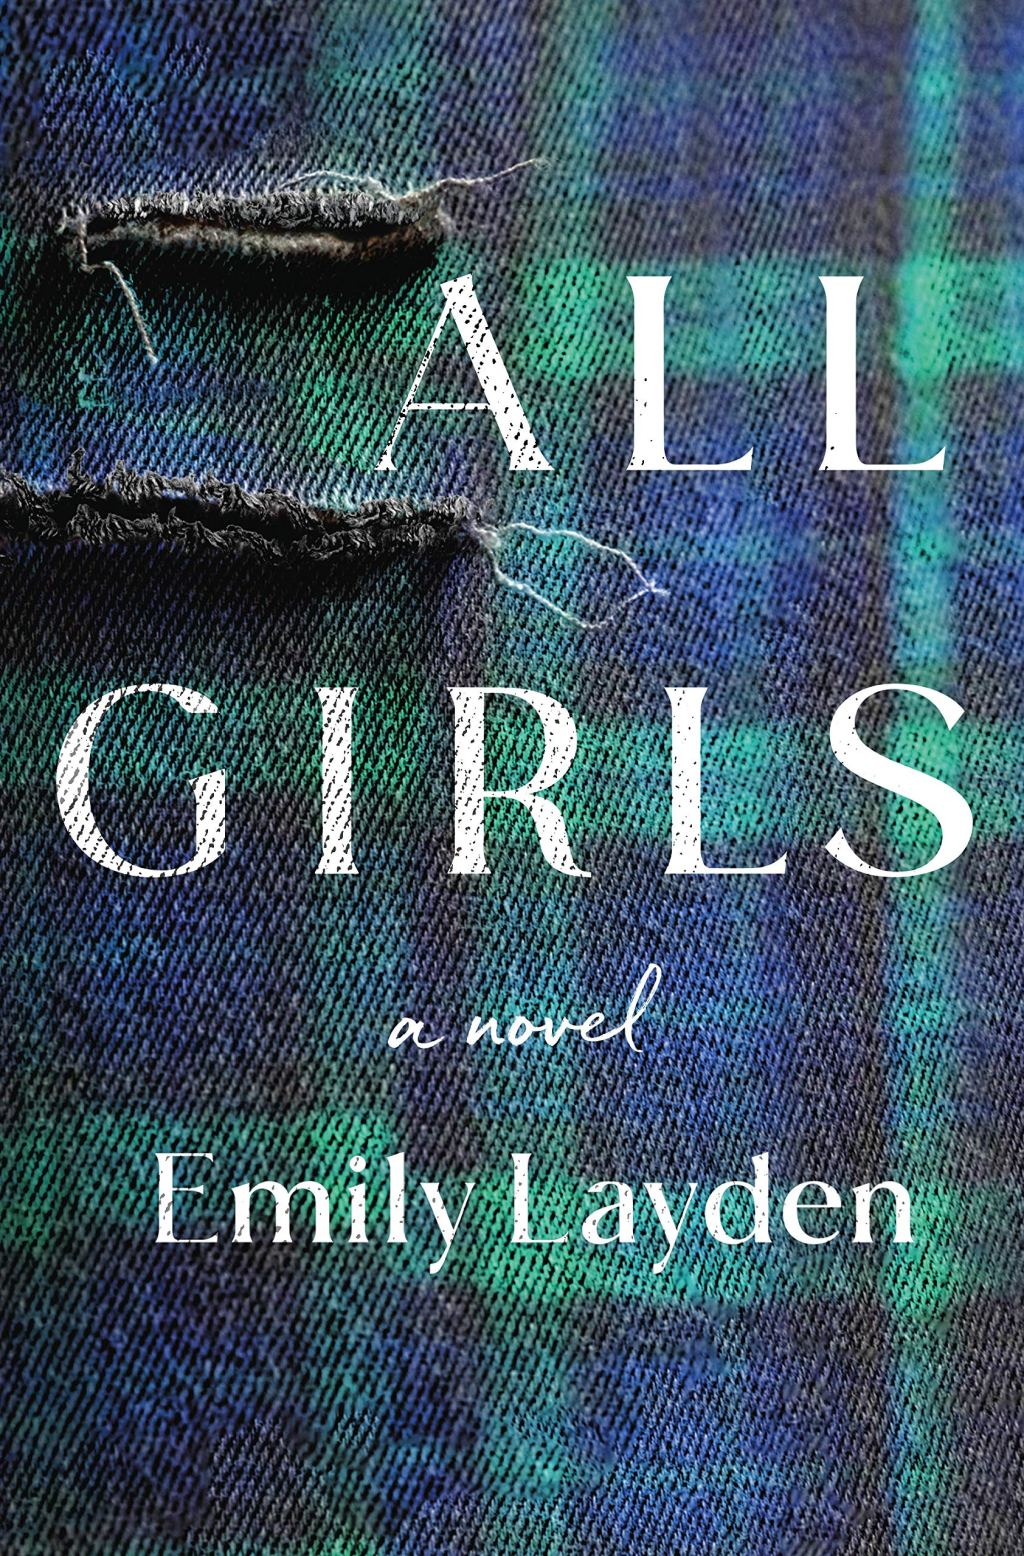 All Girls by Emily Layden is out now (John Murray, £14.99)